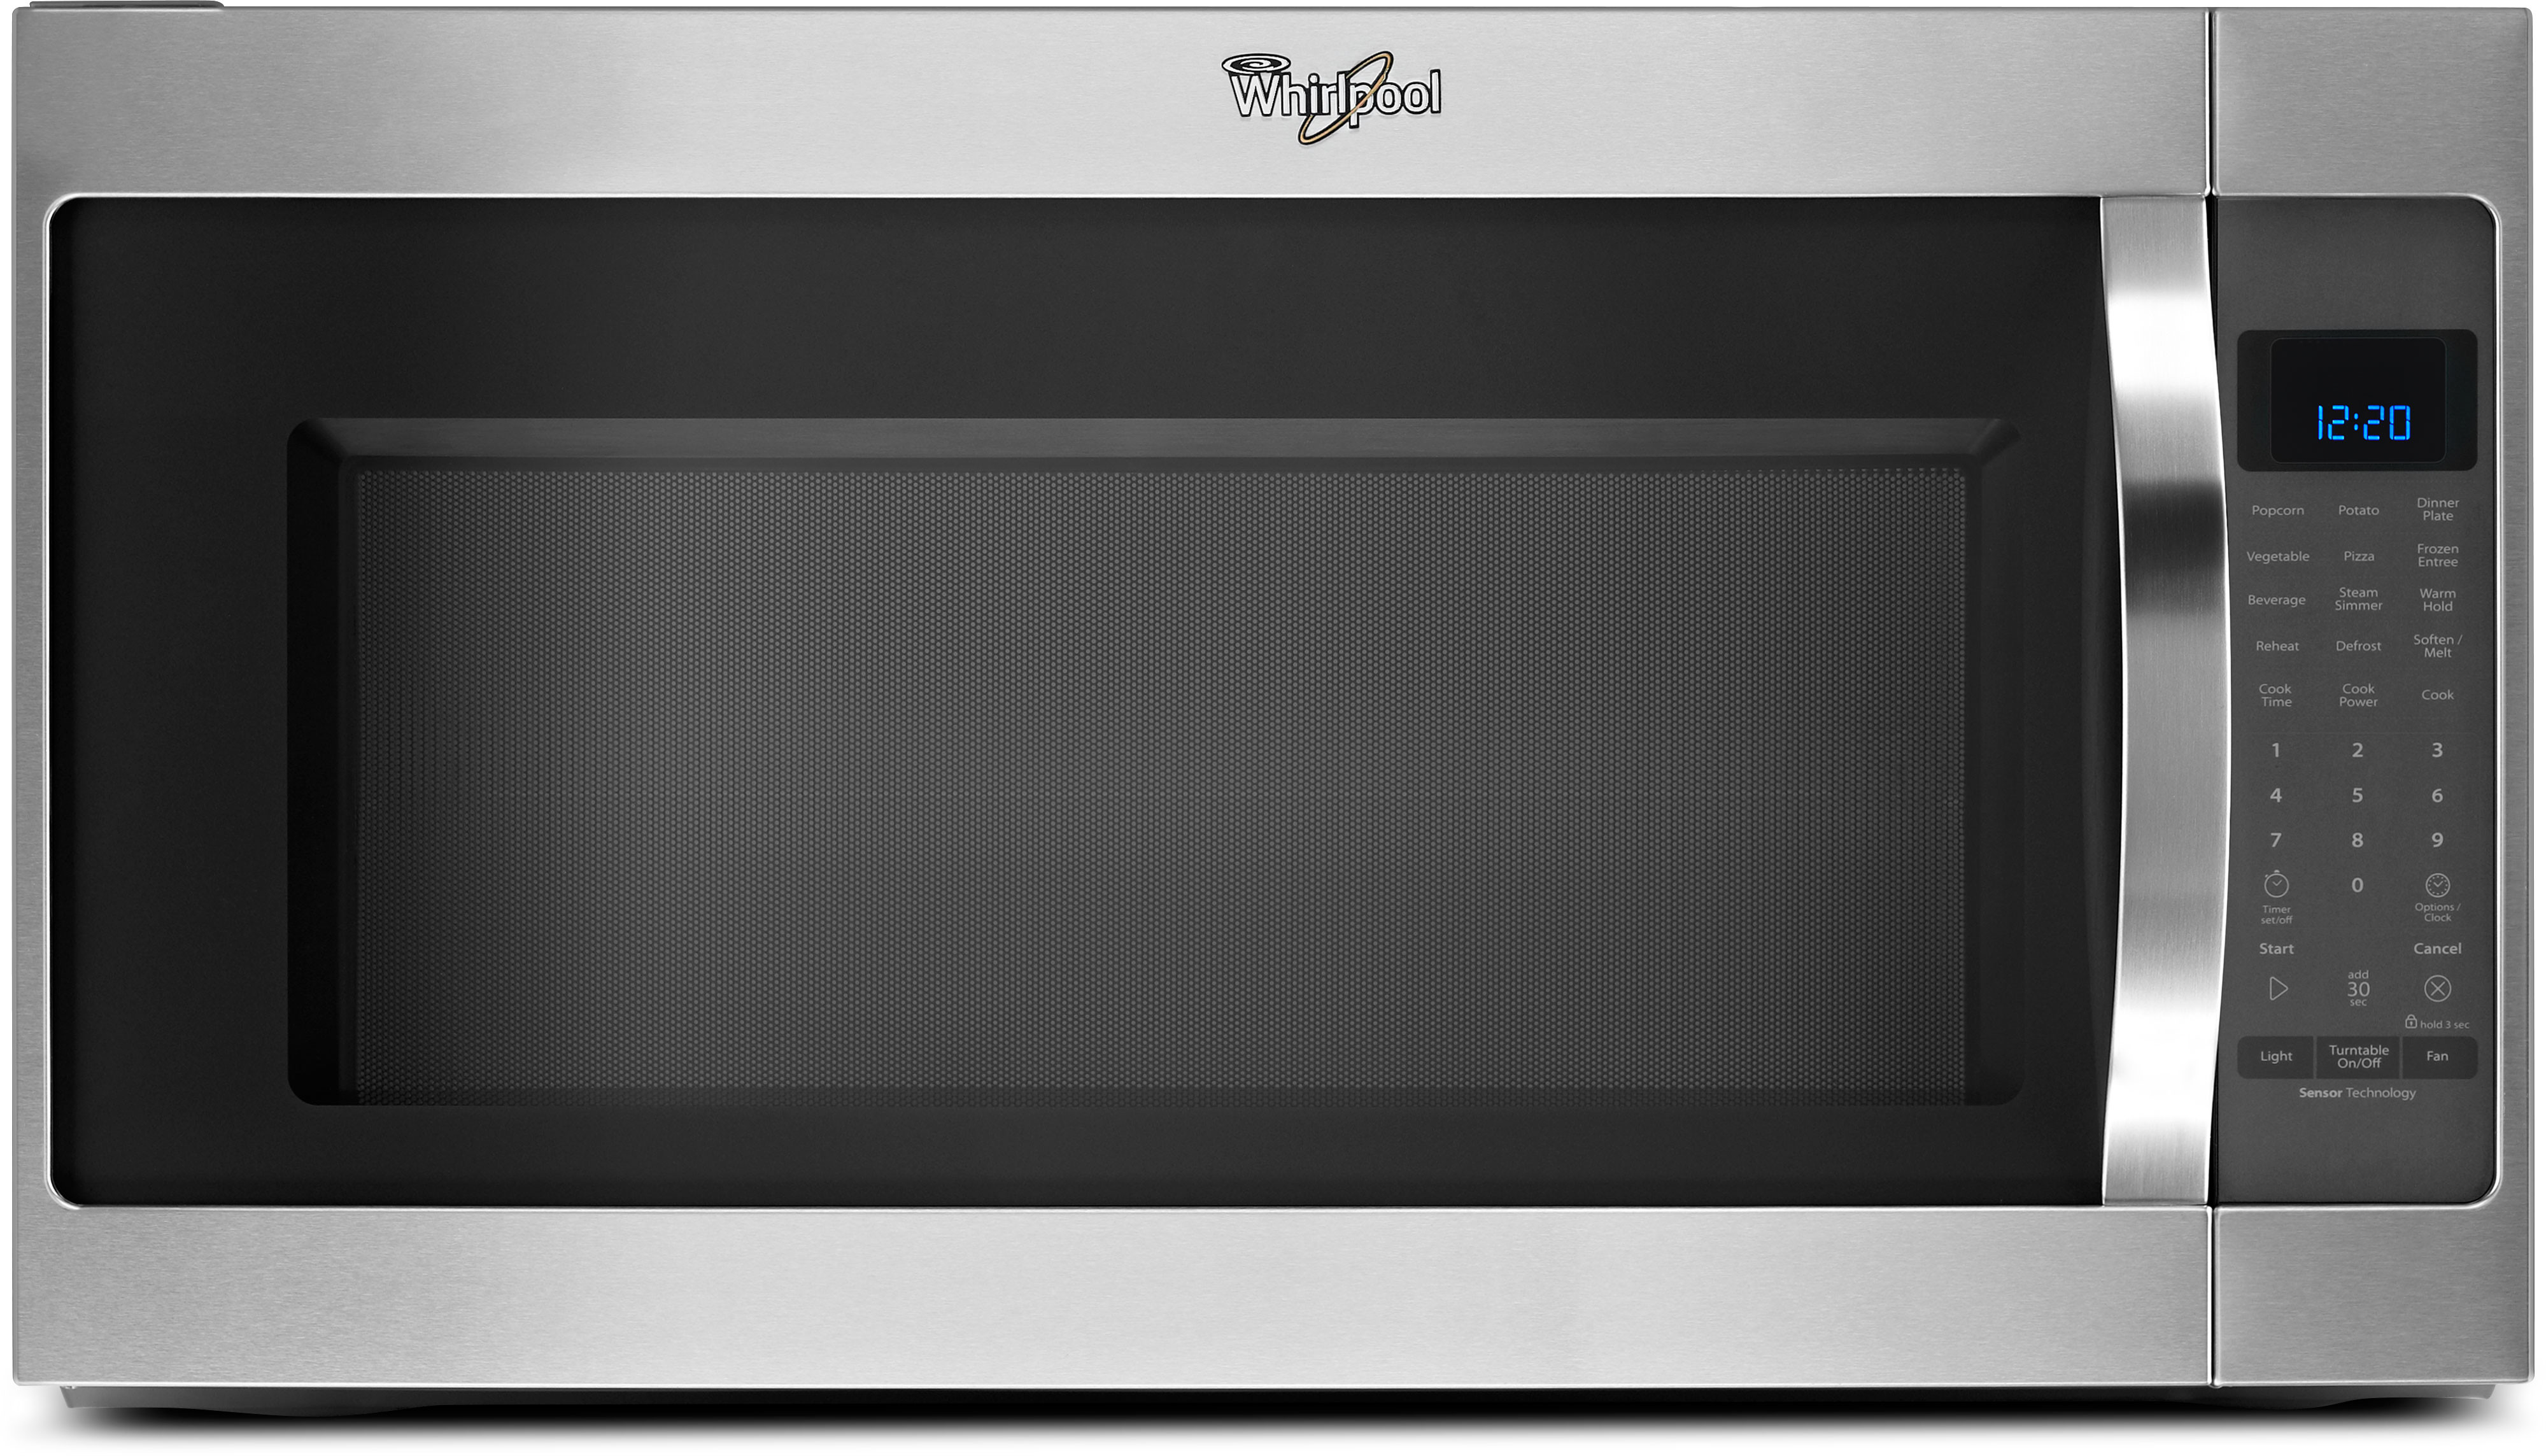 Whirlpool WMH53520CS 2.0 cu. ft. Over-the-Range Microwave Oven with